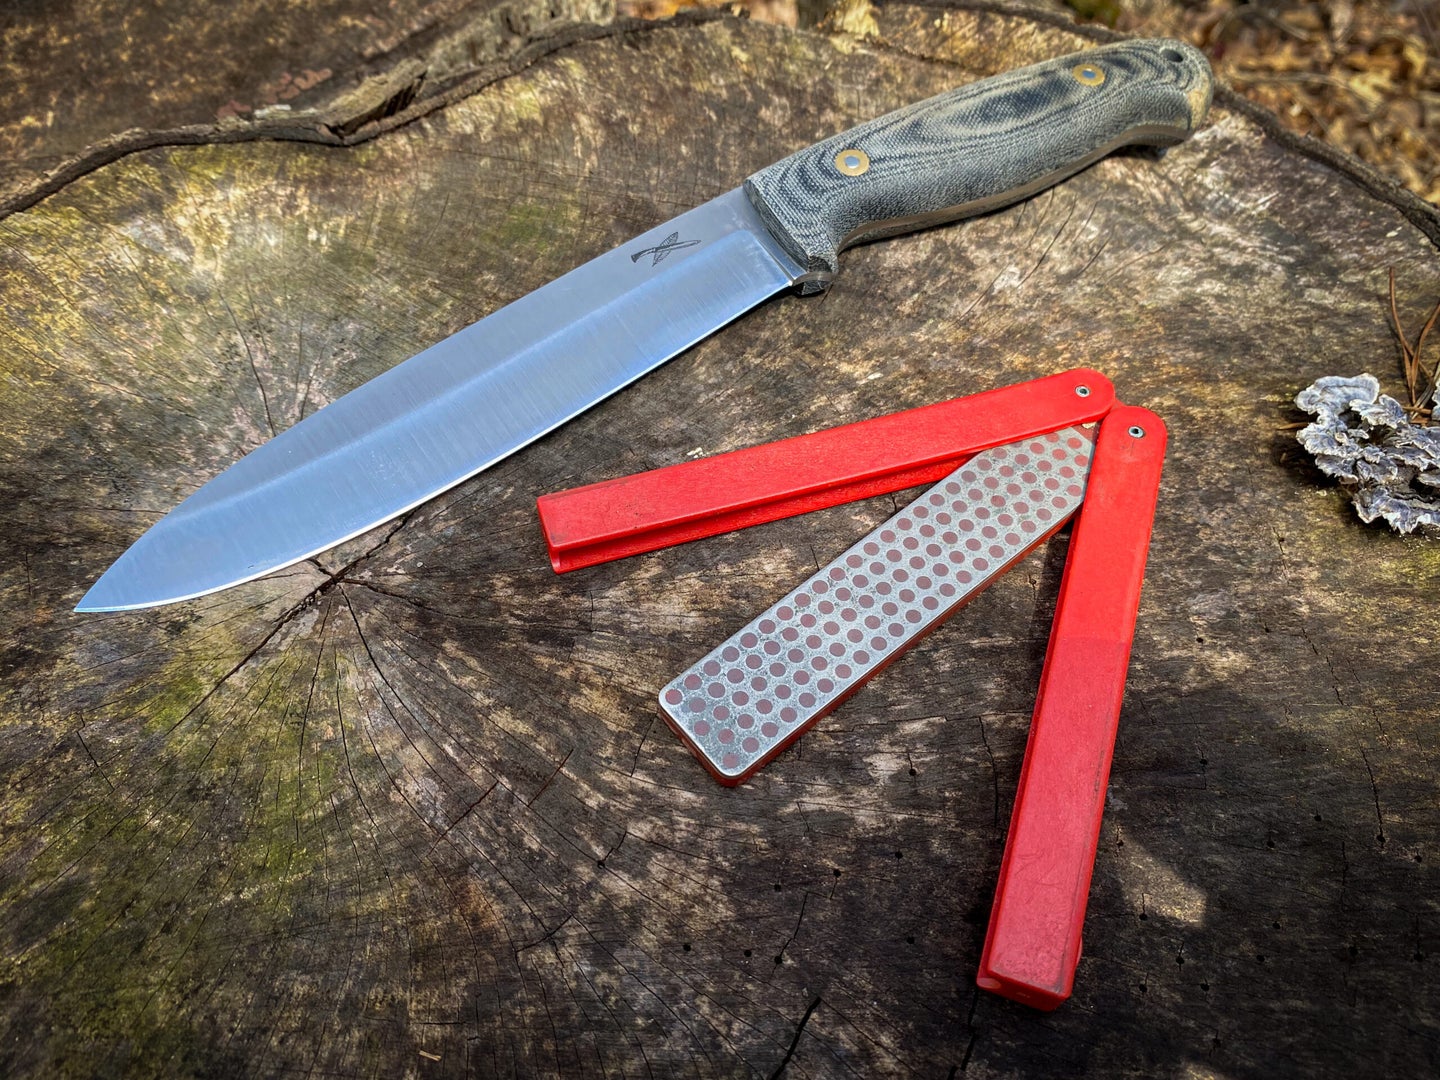 A sharpened knife with a packable diamond sharpener